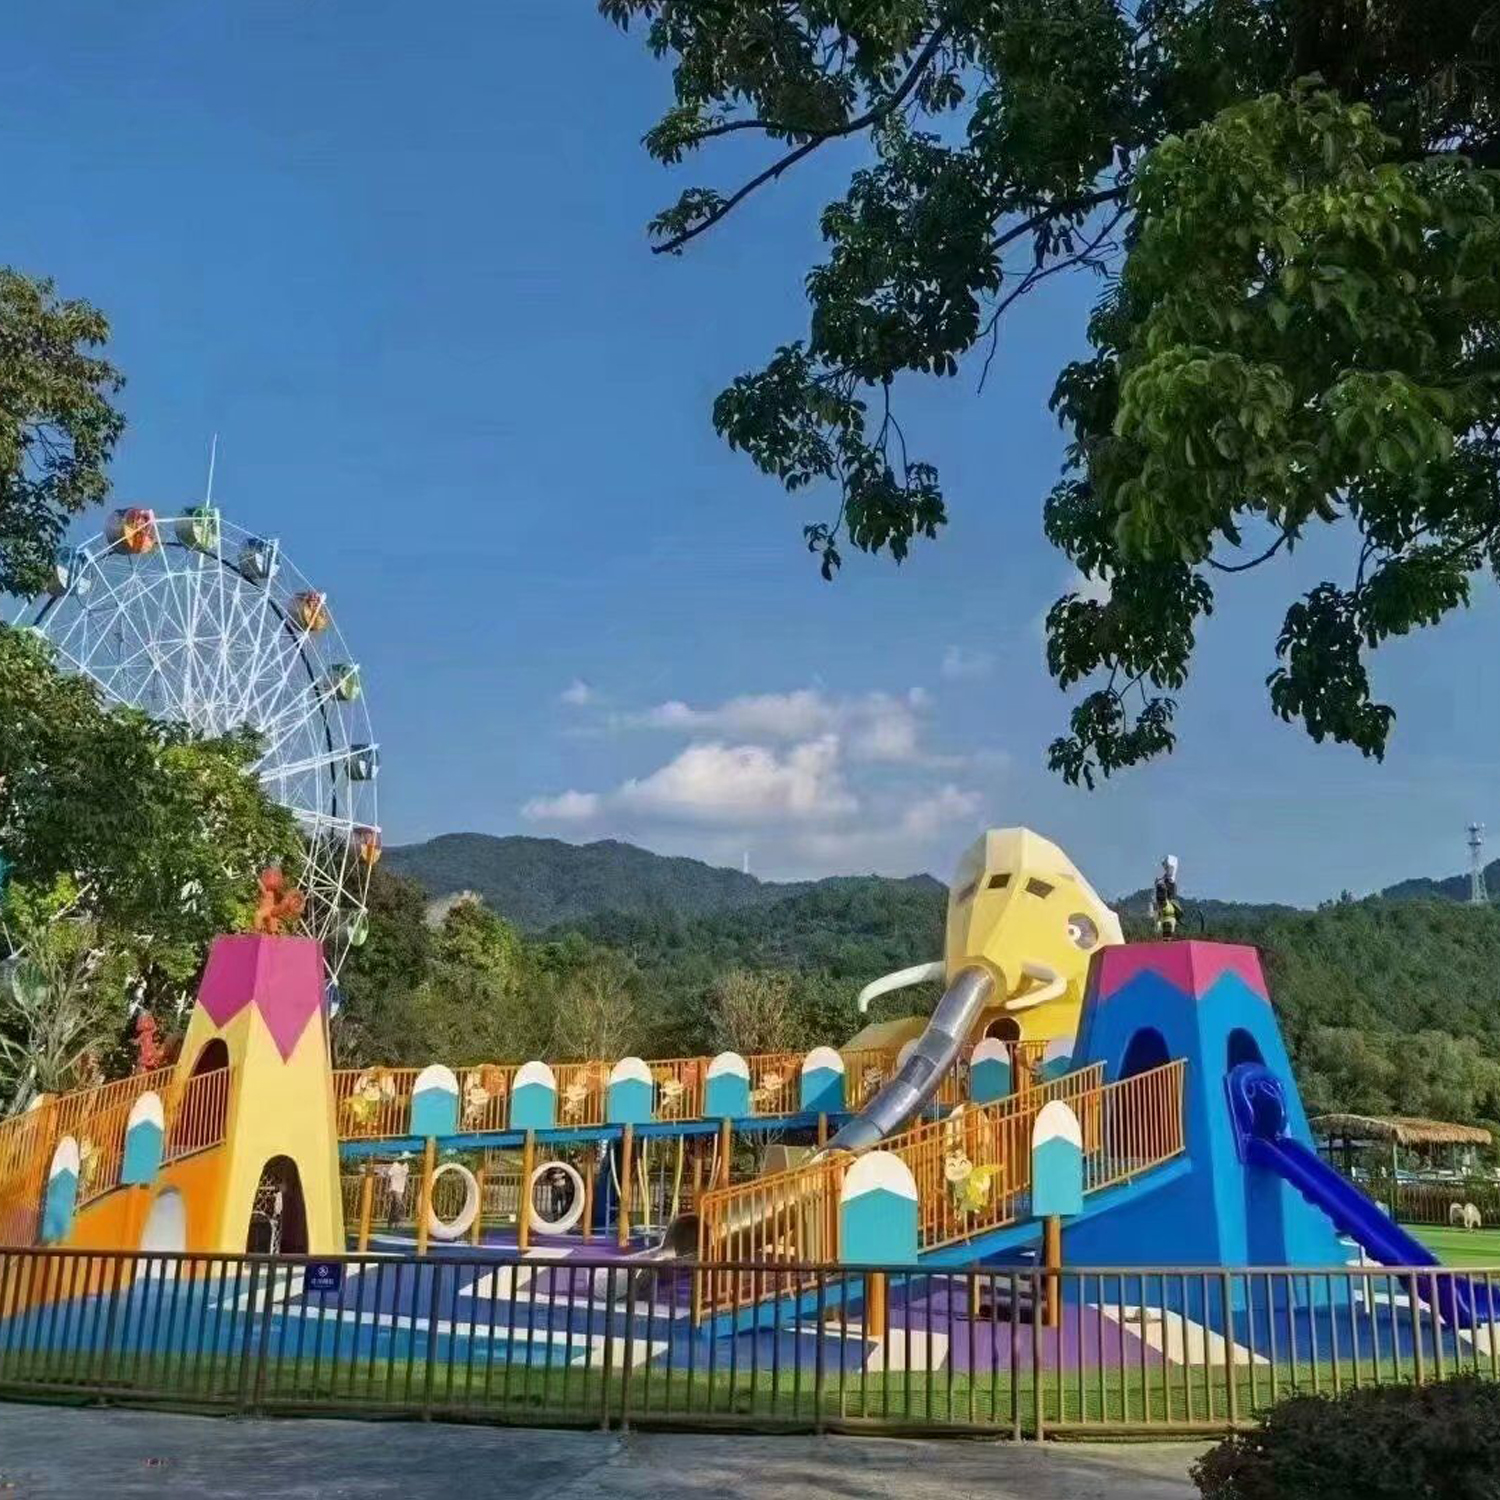 Elephant theme park Playground Structure with Coffee Houses and Bridge For Hotel and Resort